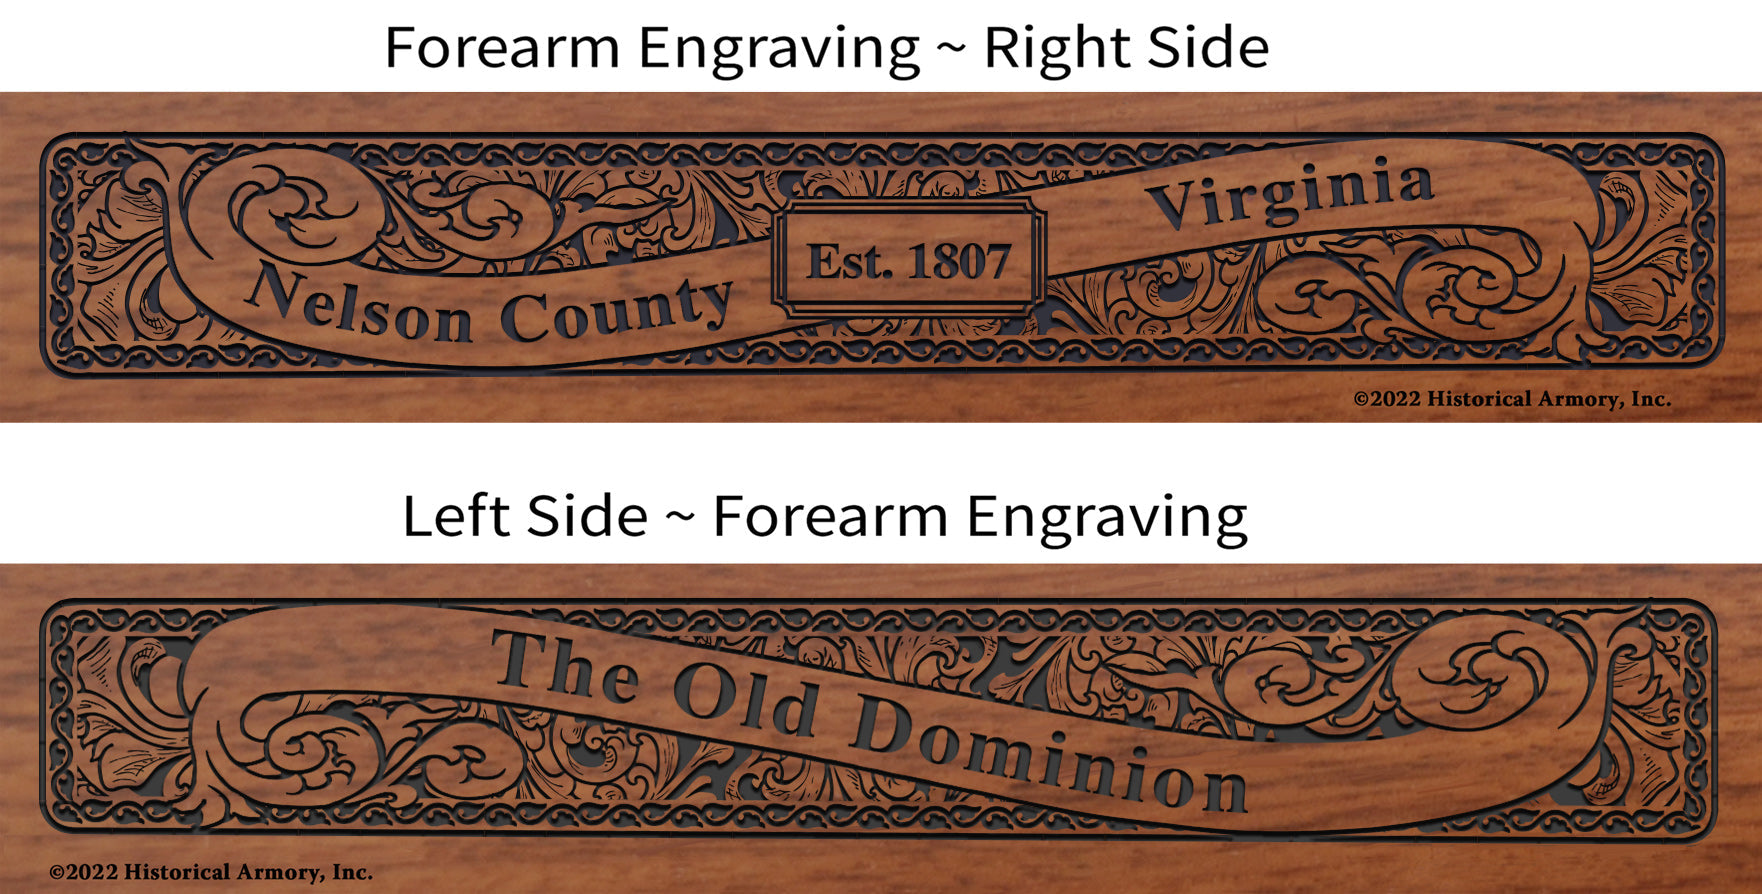 Nelson County Virginia Engraved Rifle Forearm